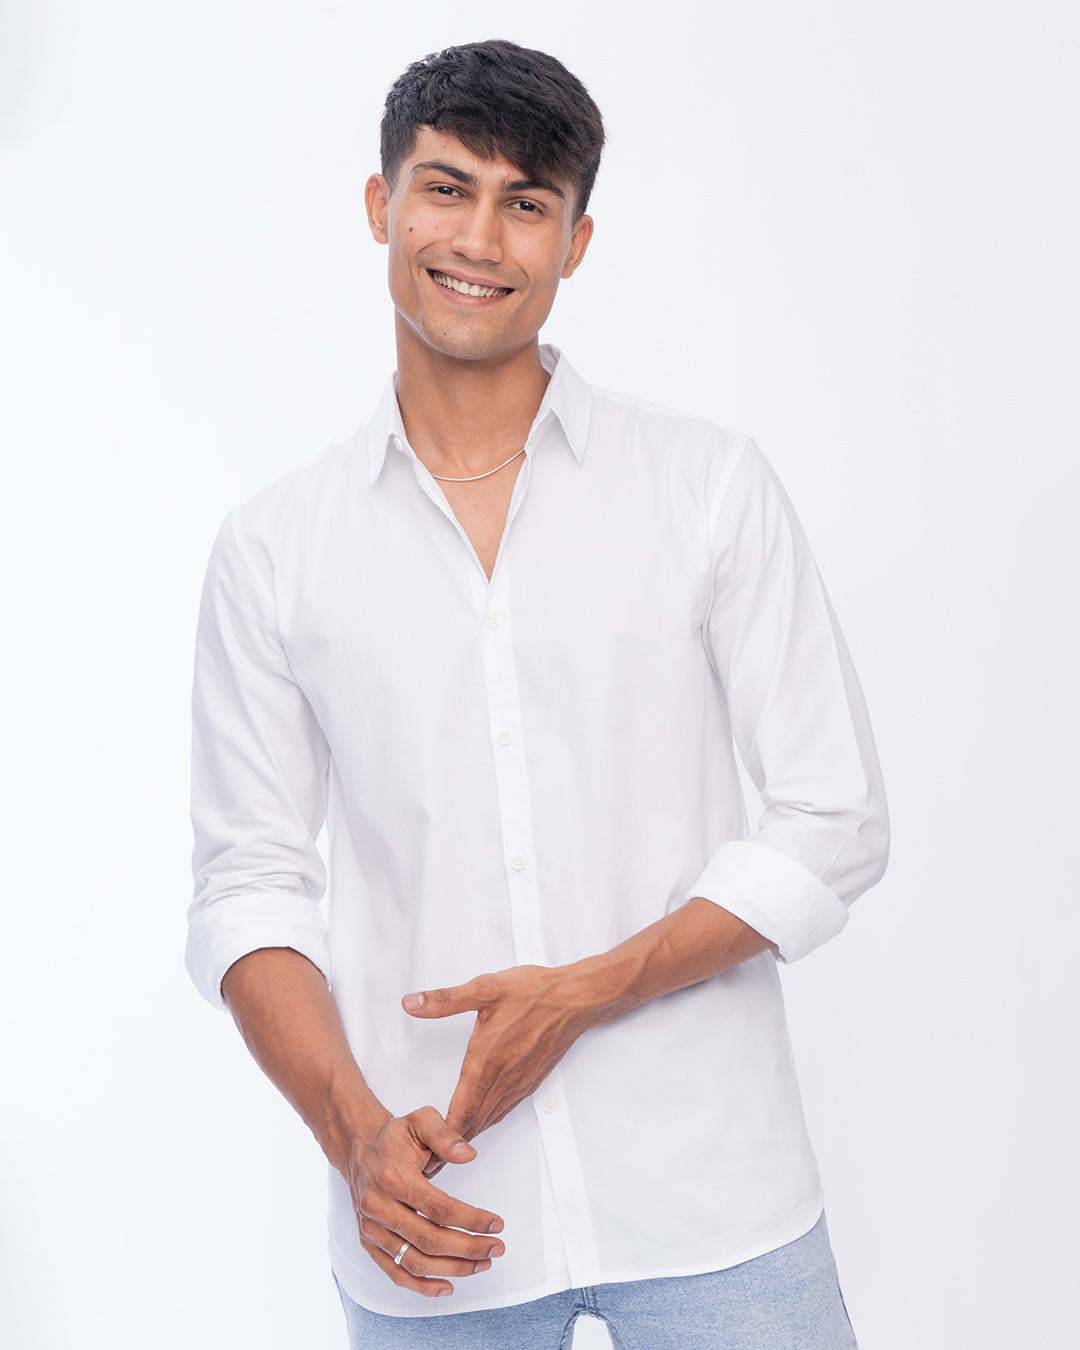 A person with short dark hair is smiling at the camera, wearing a Crystal - Classic Shirt with the sleeves slightly rolled up. One arm is relaxed by their side, and the other hand is resting on it. The background is plain white.